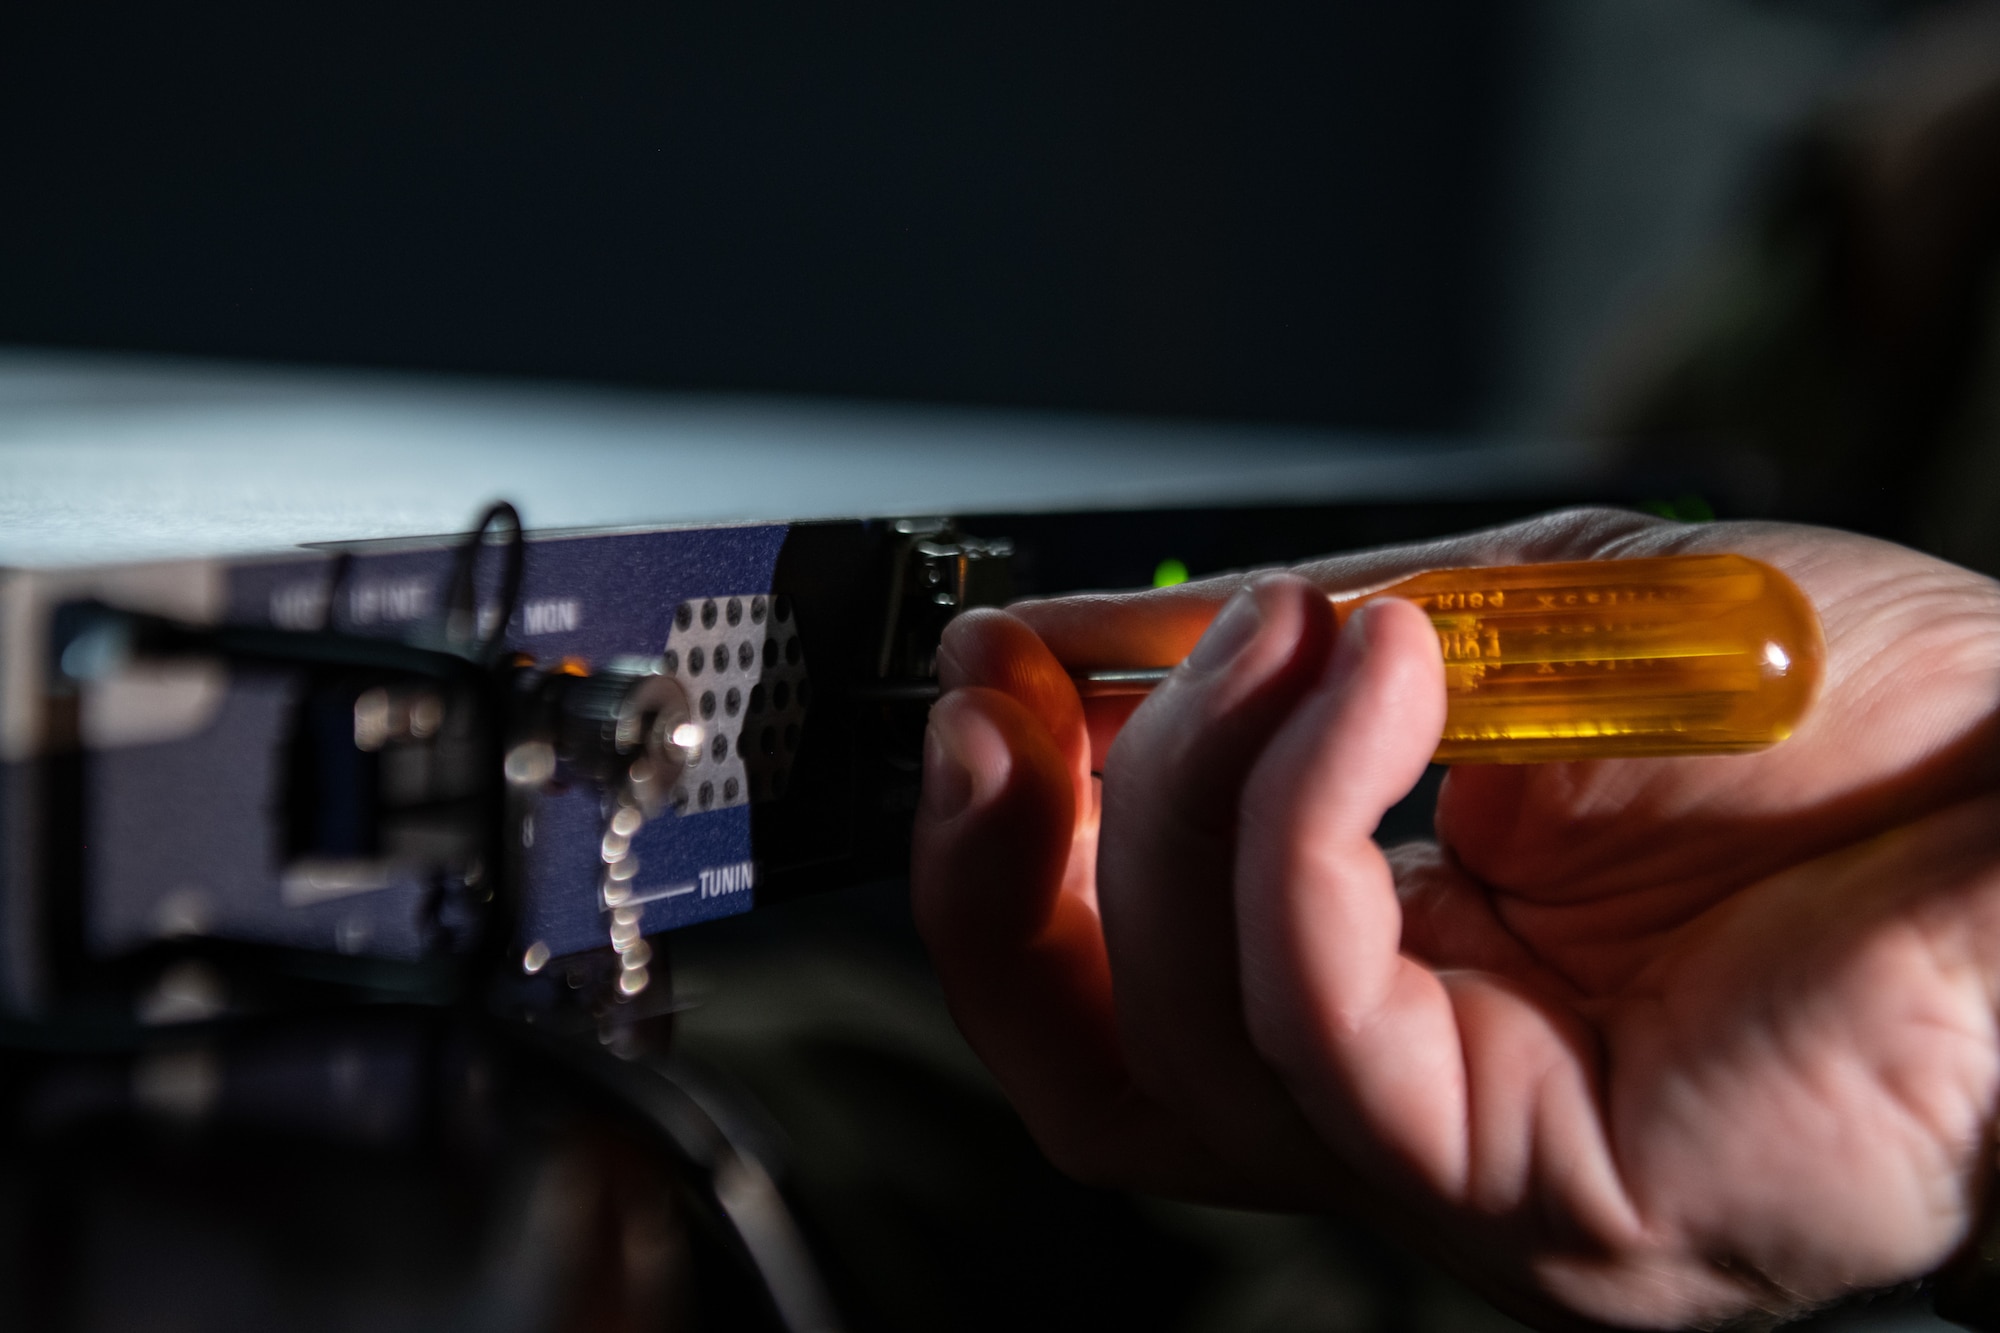 A screwdriver is used to tune a CM-300 digital receiver that will be installed in the 36th Operations Support Squadron air traffic control tower at Andersen Air Force Base in Guam on Sept. 15, 2019. The 205th EIS had seven Airmen working to install ten CM-300/350 radios in the 36th Operations Support Squadron air traffic control tower as part of the U.S. Air Force Air Traffic Control and Landing Systems Radio Replacement Program. (U.S. Air National Guard photo by Staff Sgt. Brigette Waltermire)